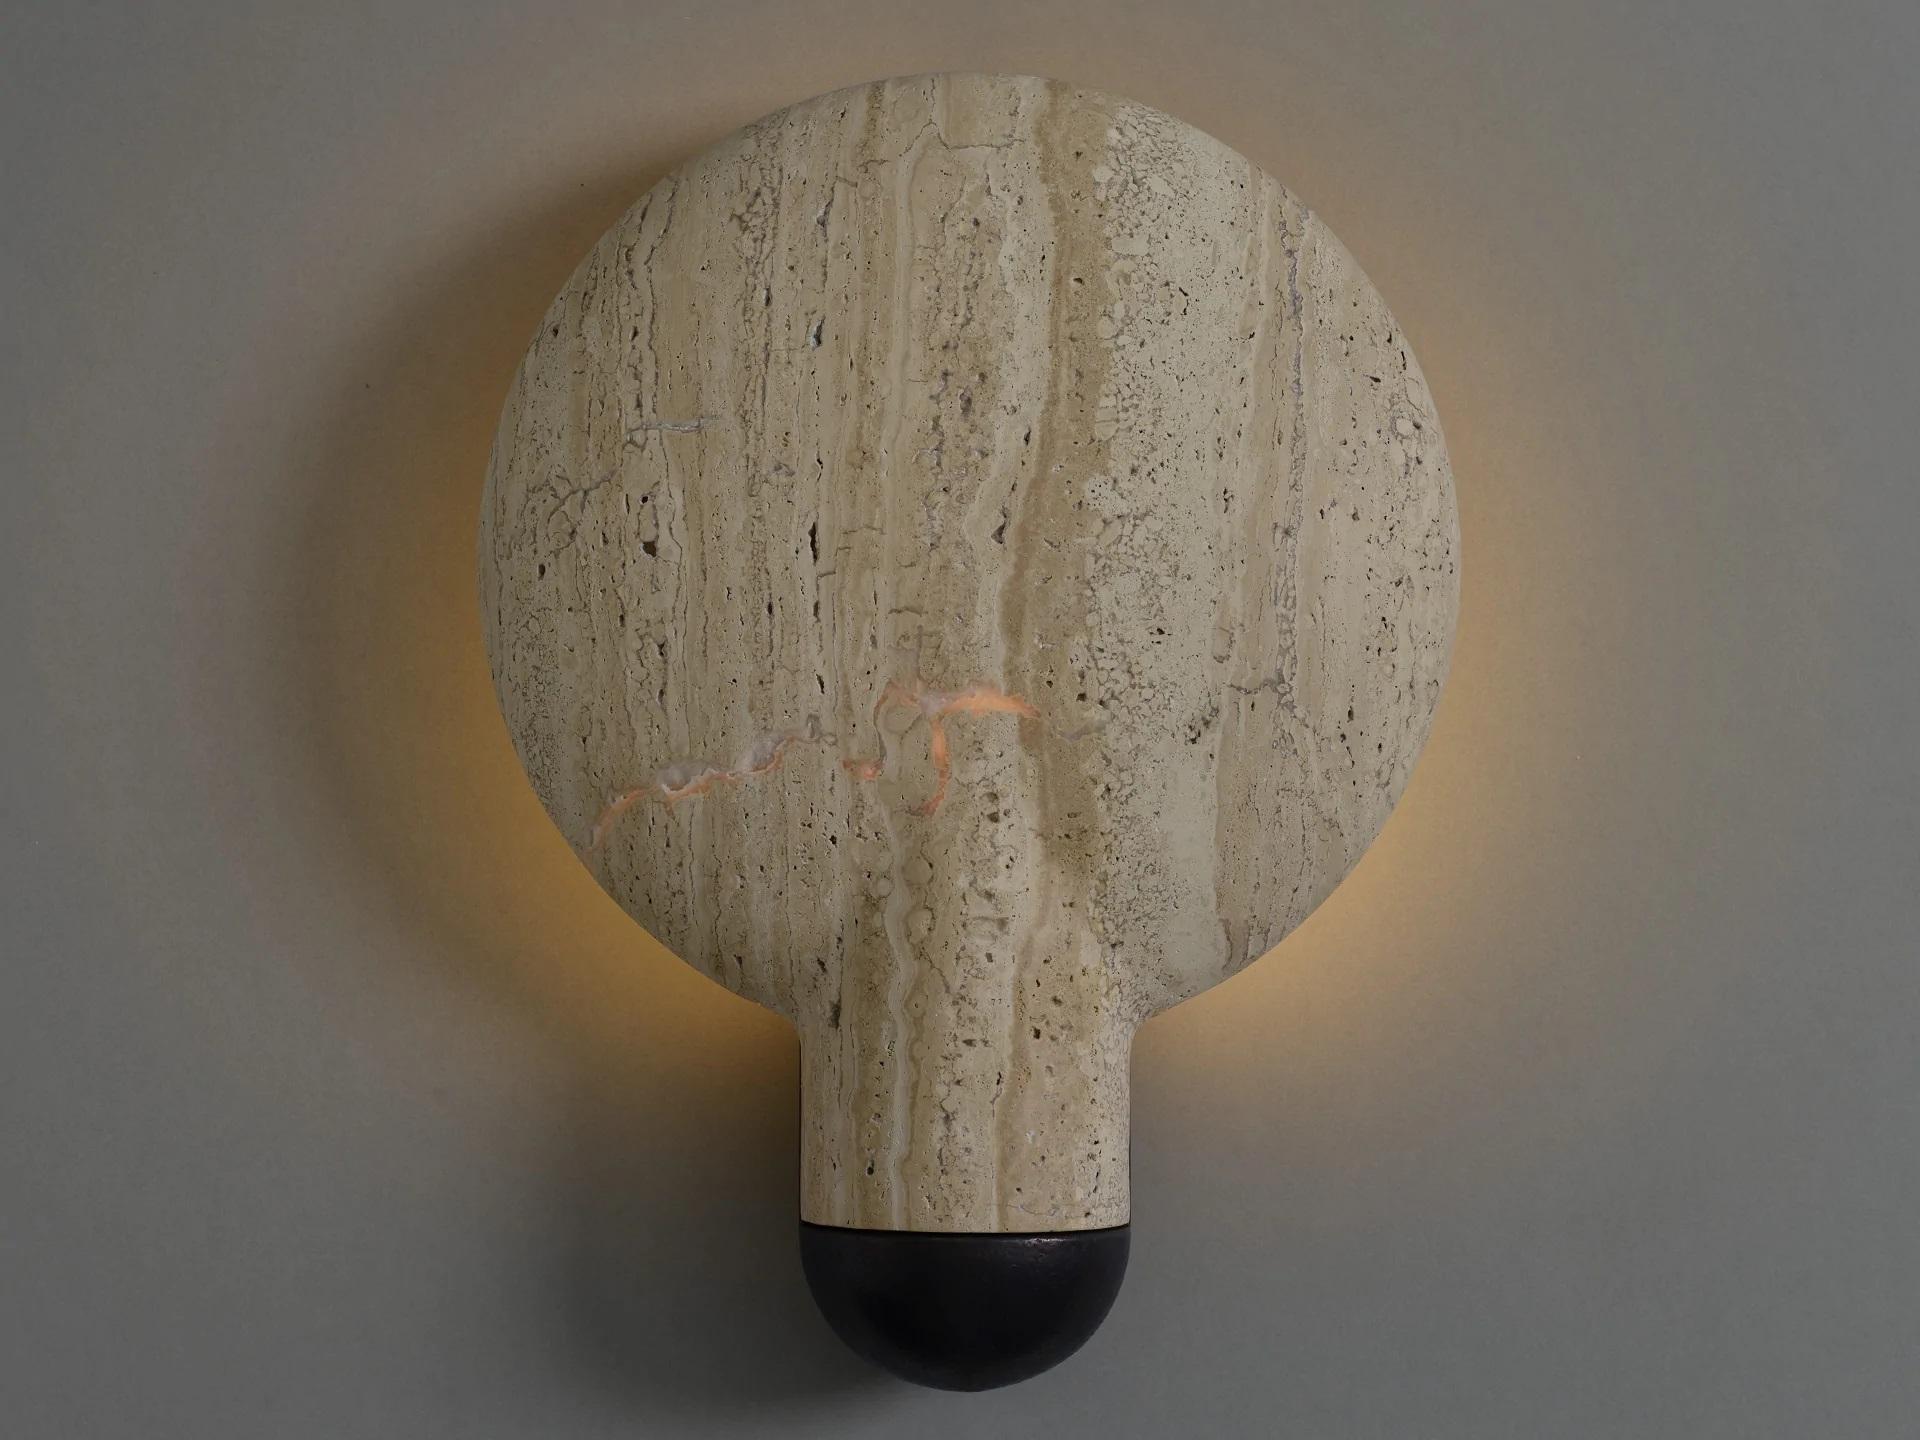 Classico Travertine wall sconce by Henry Wilson
Materials: travertine.
Dimensions: D 11 x W 30 x H 40 cm

Sandwiched between two components, the light source is projected onto the concave backing. The light follows the gentle bowl of the dish